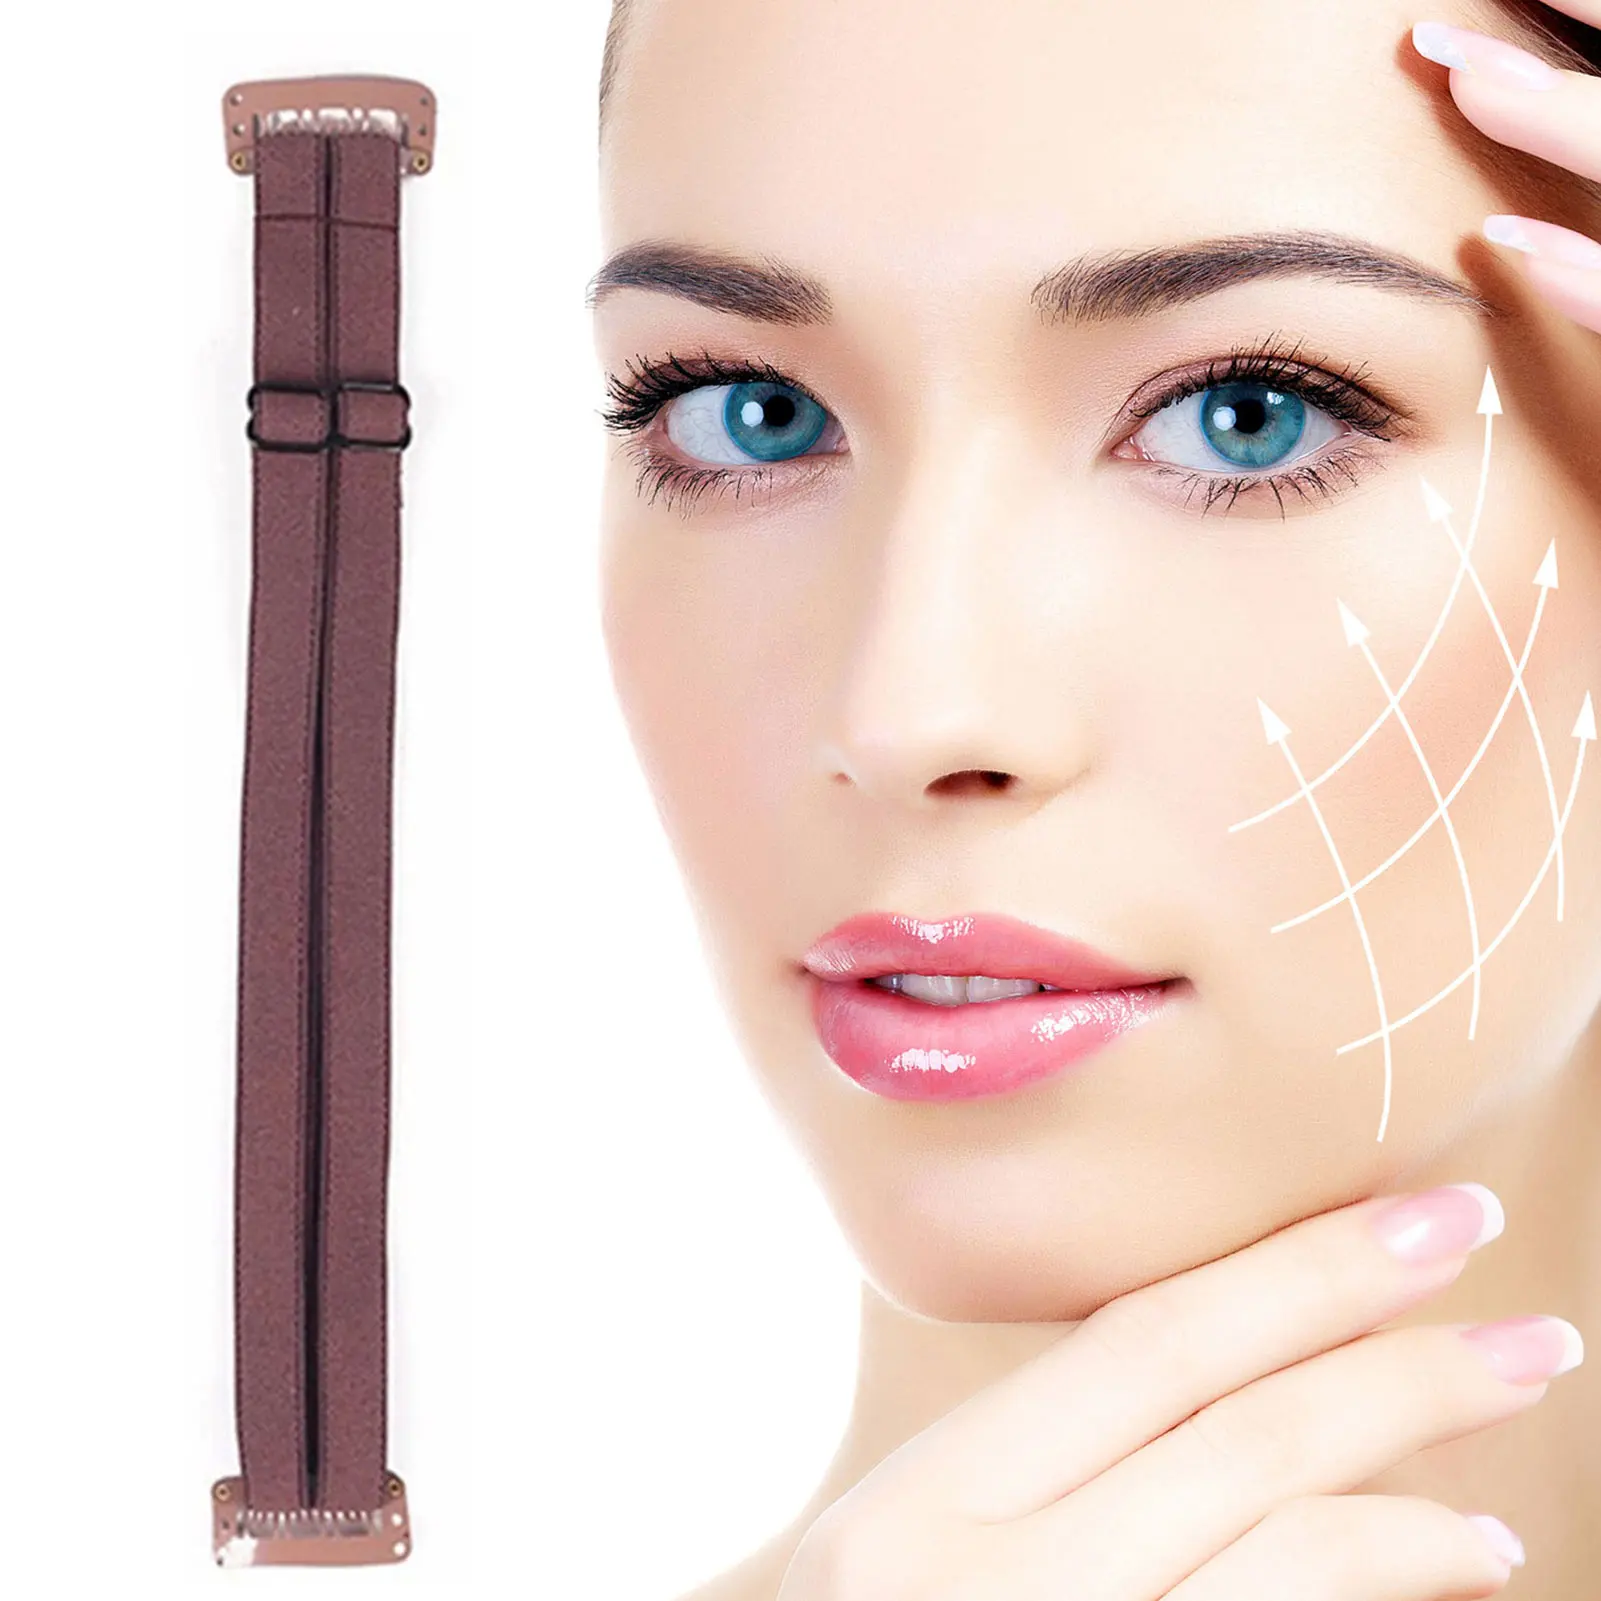 

Invisible Hairpin Face Slimming Bands Wrinkles Remove Bands Face Lifting Hairpins Statute Lines Eye Bags Face Lift Maquiagem